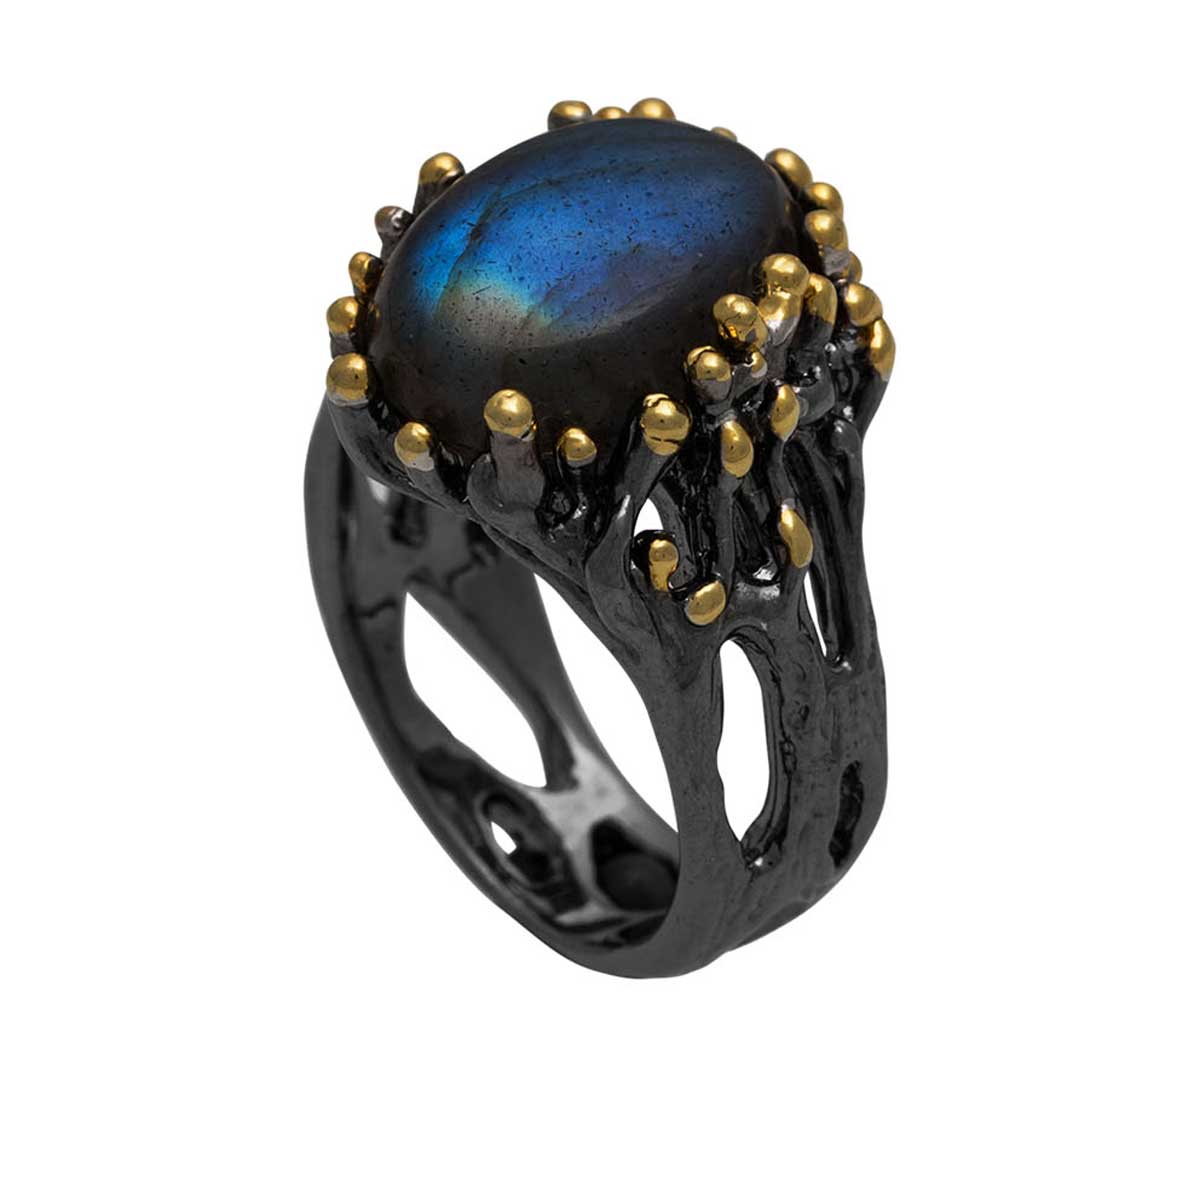 SOLID 925 STERLING SILVER GOLD PLATED LABRADORITE GEMSTONE MENS RING JEWELRY 